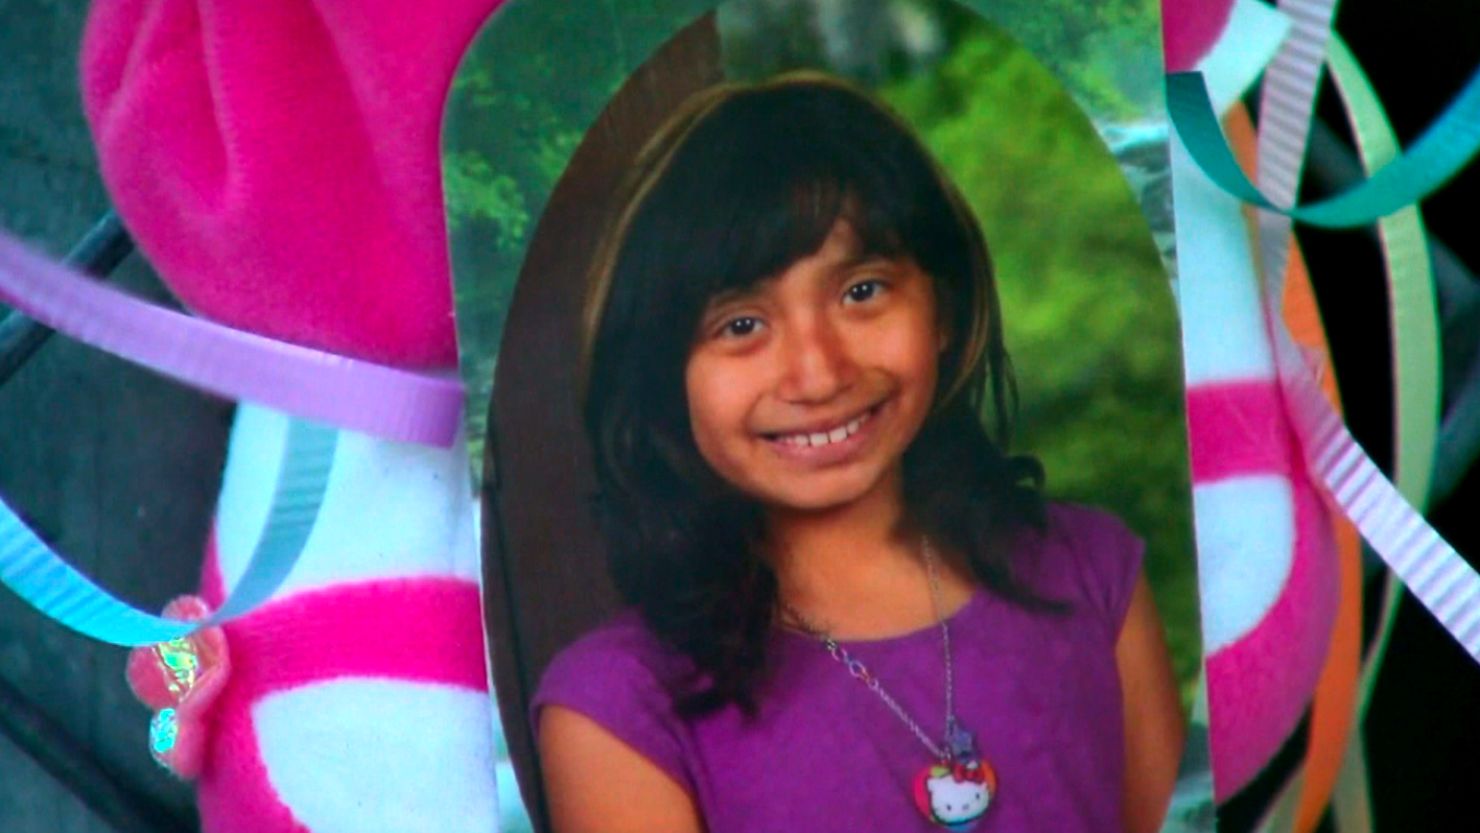 Fifth-grade student Joanna Ramos died last week after an altercation with a female classmate in Long Beach, California.